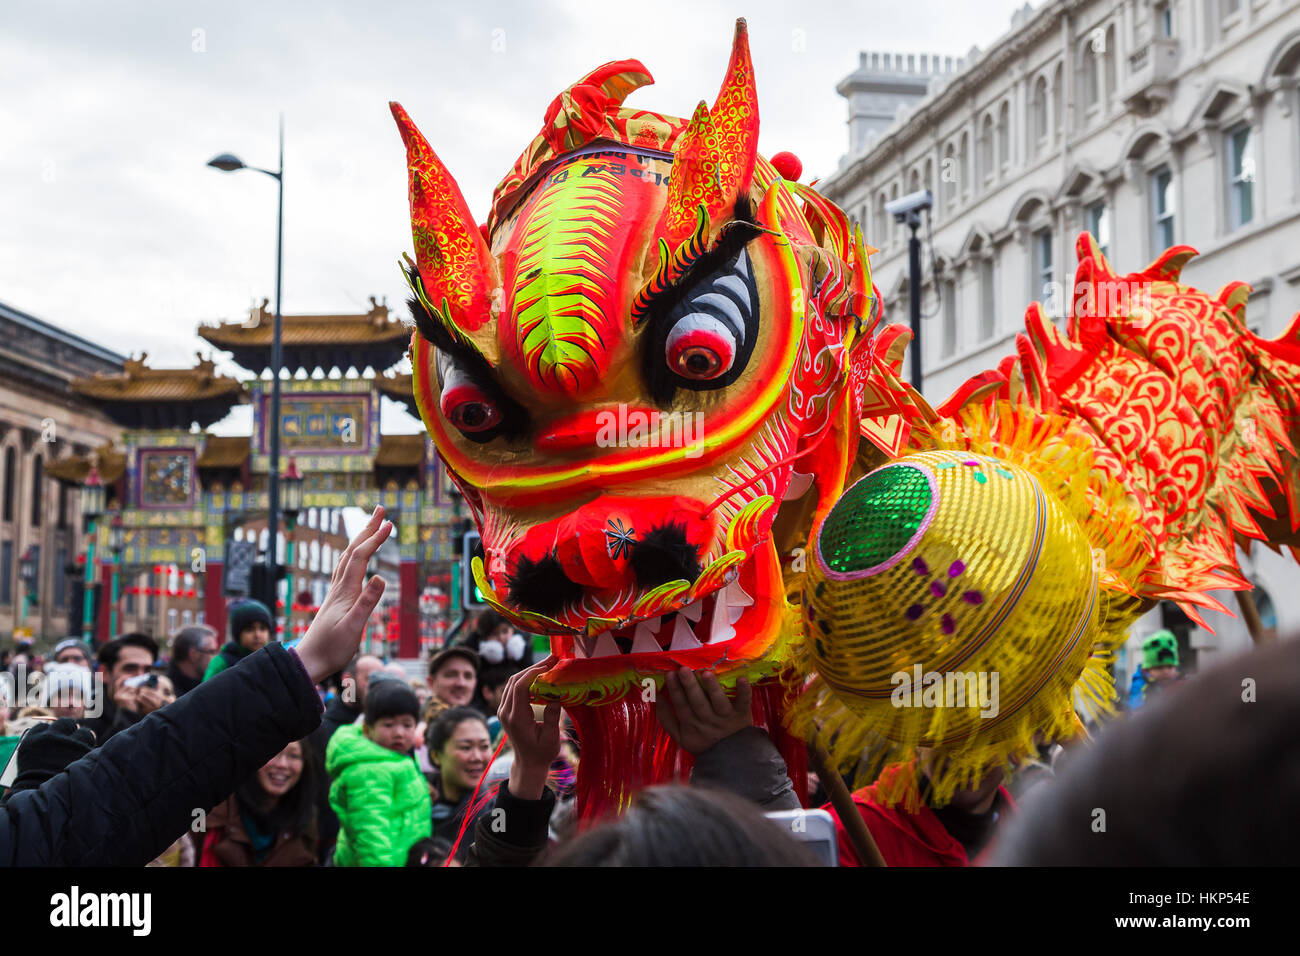 The dragon dance slows the pace down as it takes a moment to meet the crowds on the streets of Liverpool during Chinese New Year celebrations Stock Photo